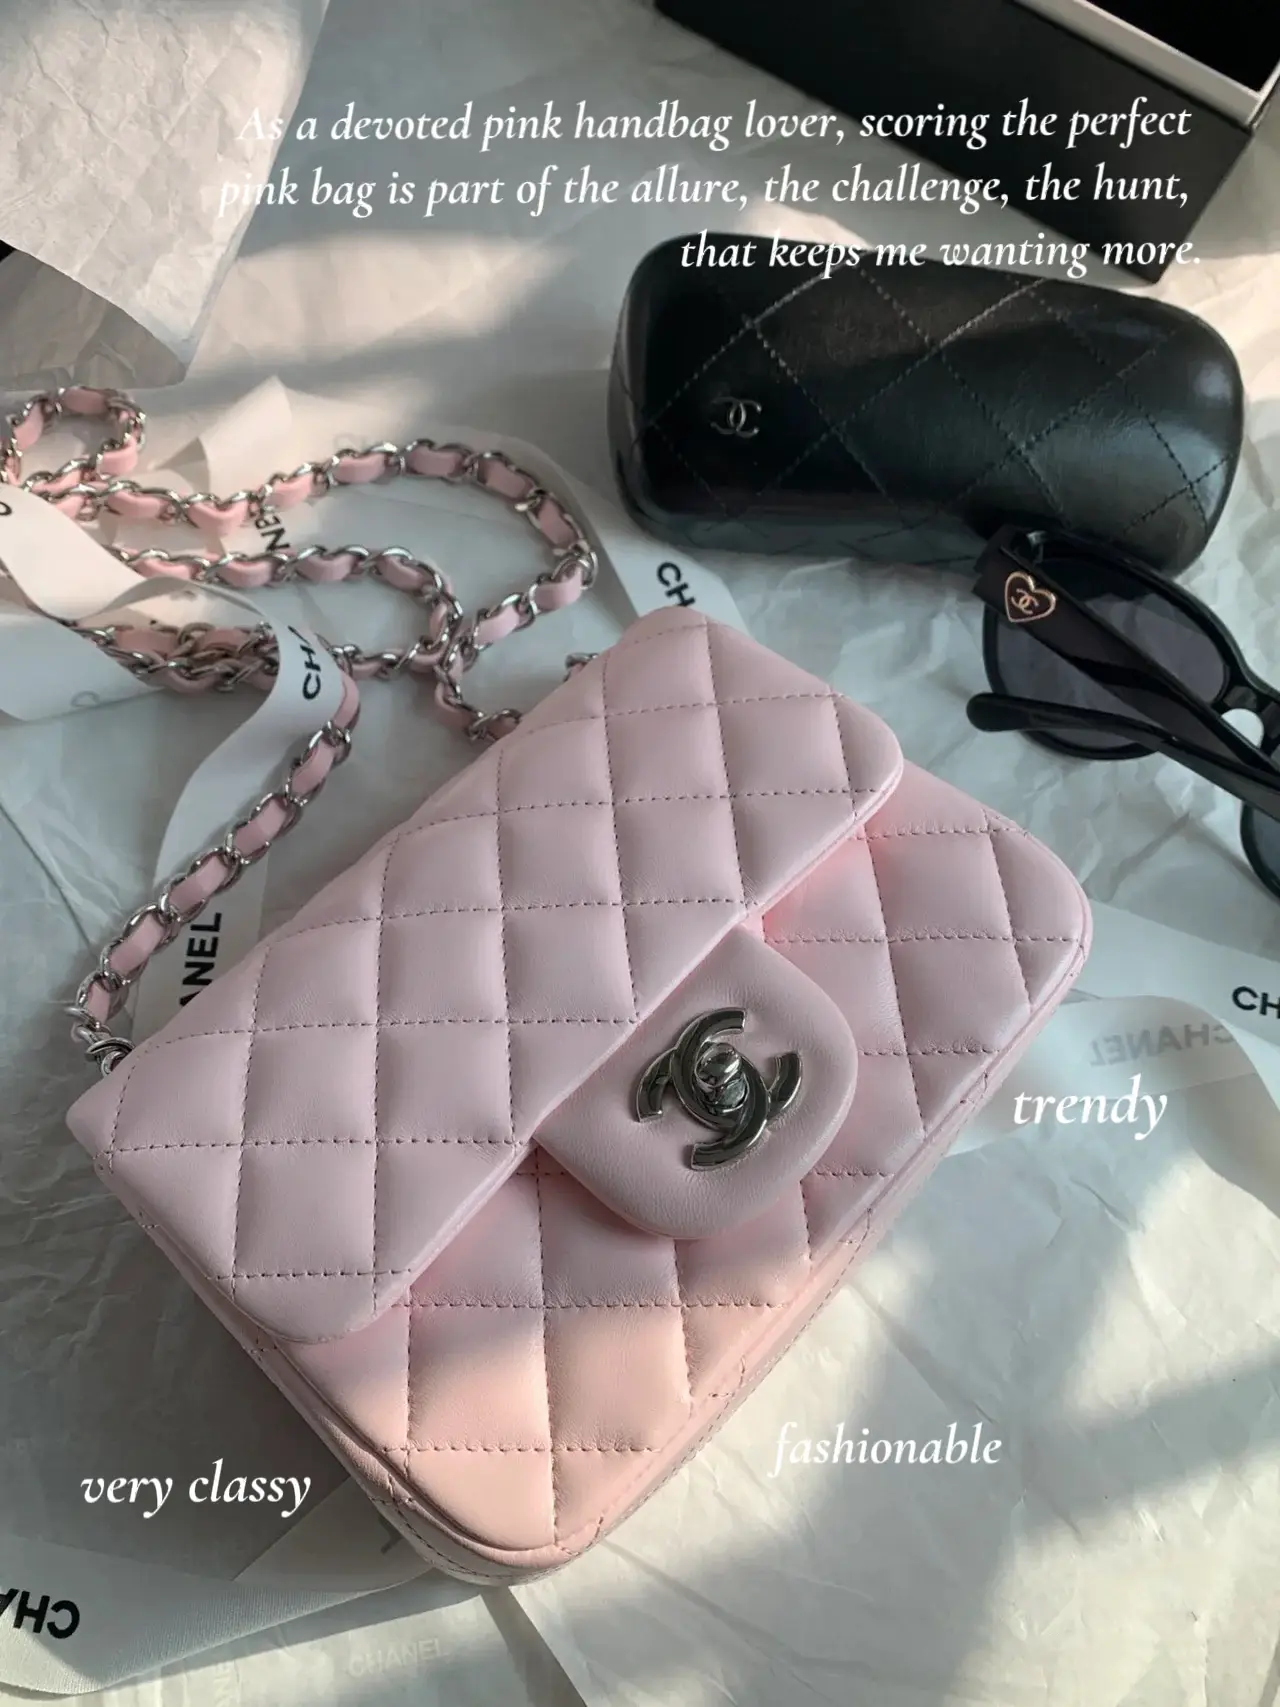 Chanel Classic Small Double Flap 22S Pink Quilted Caviar with light gold  hardware